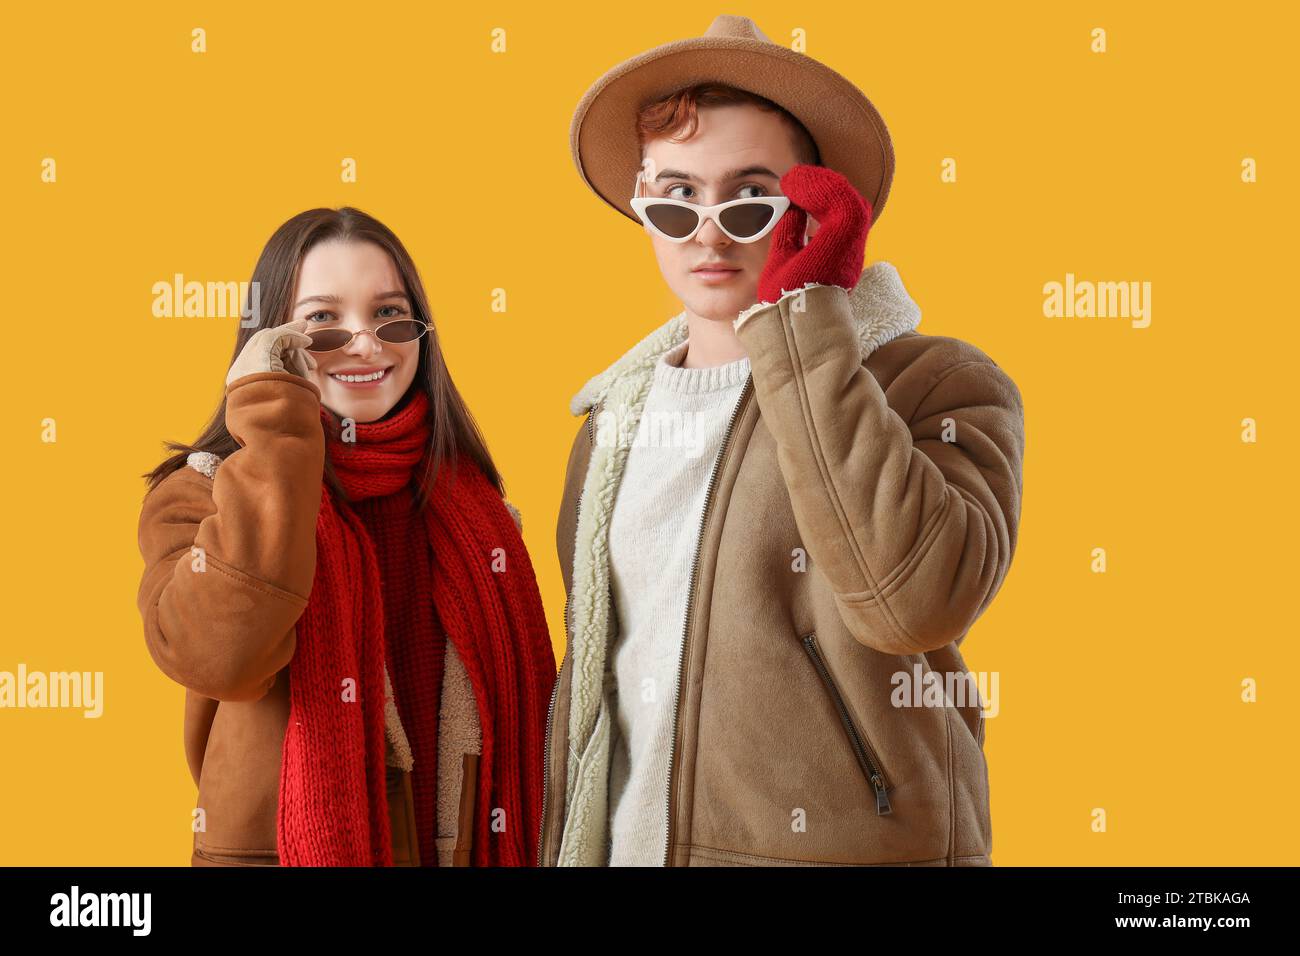 Young couple in winter clothes on yellow background Stock Photo